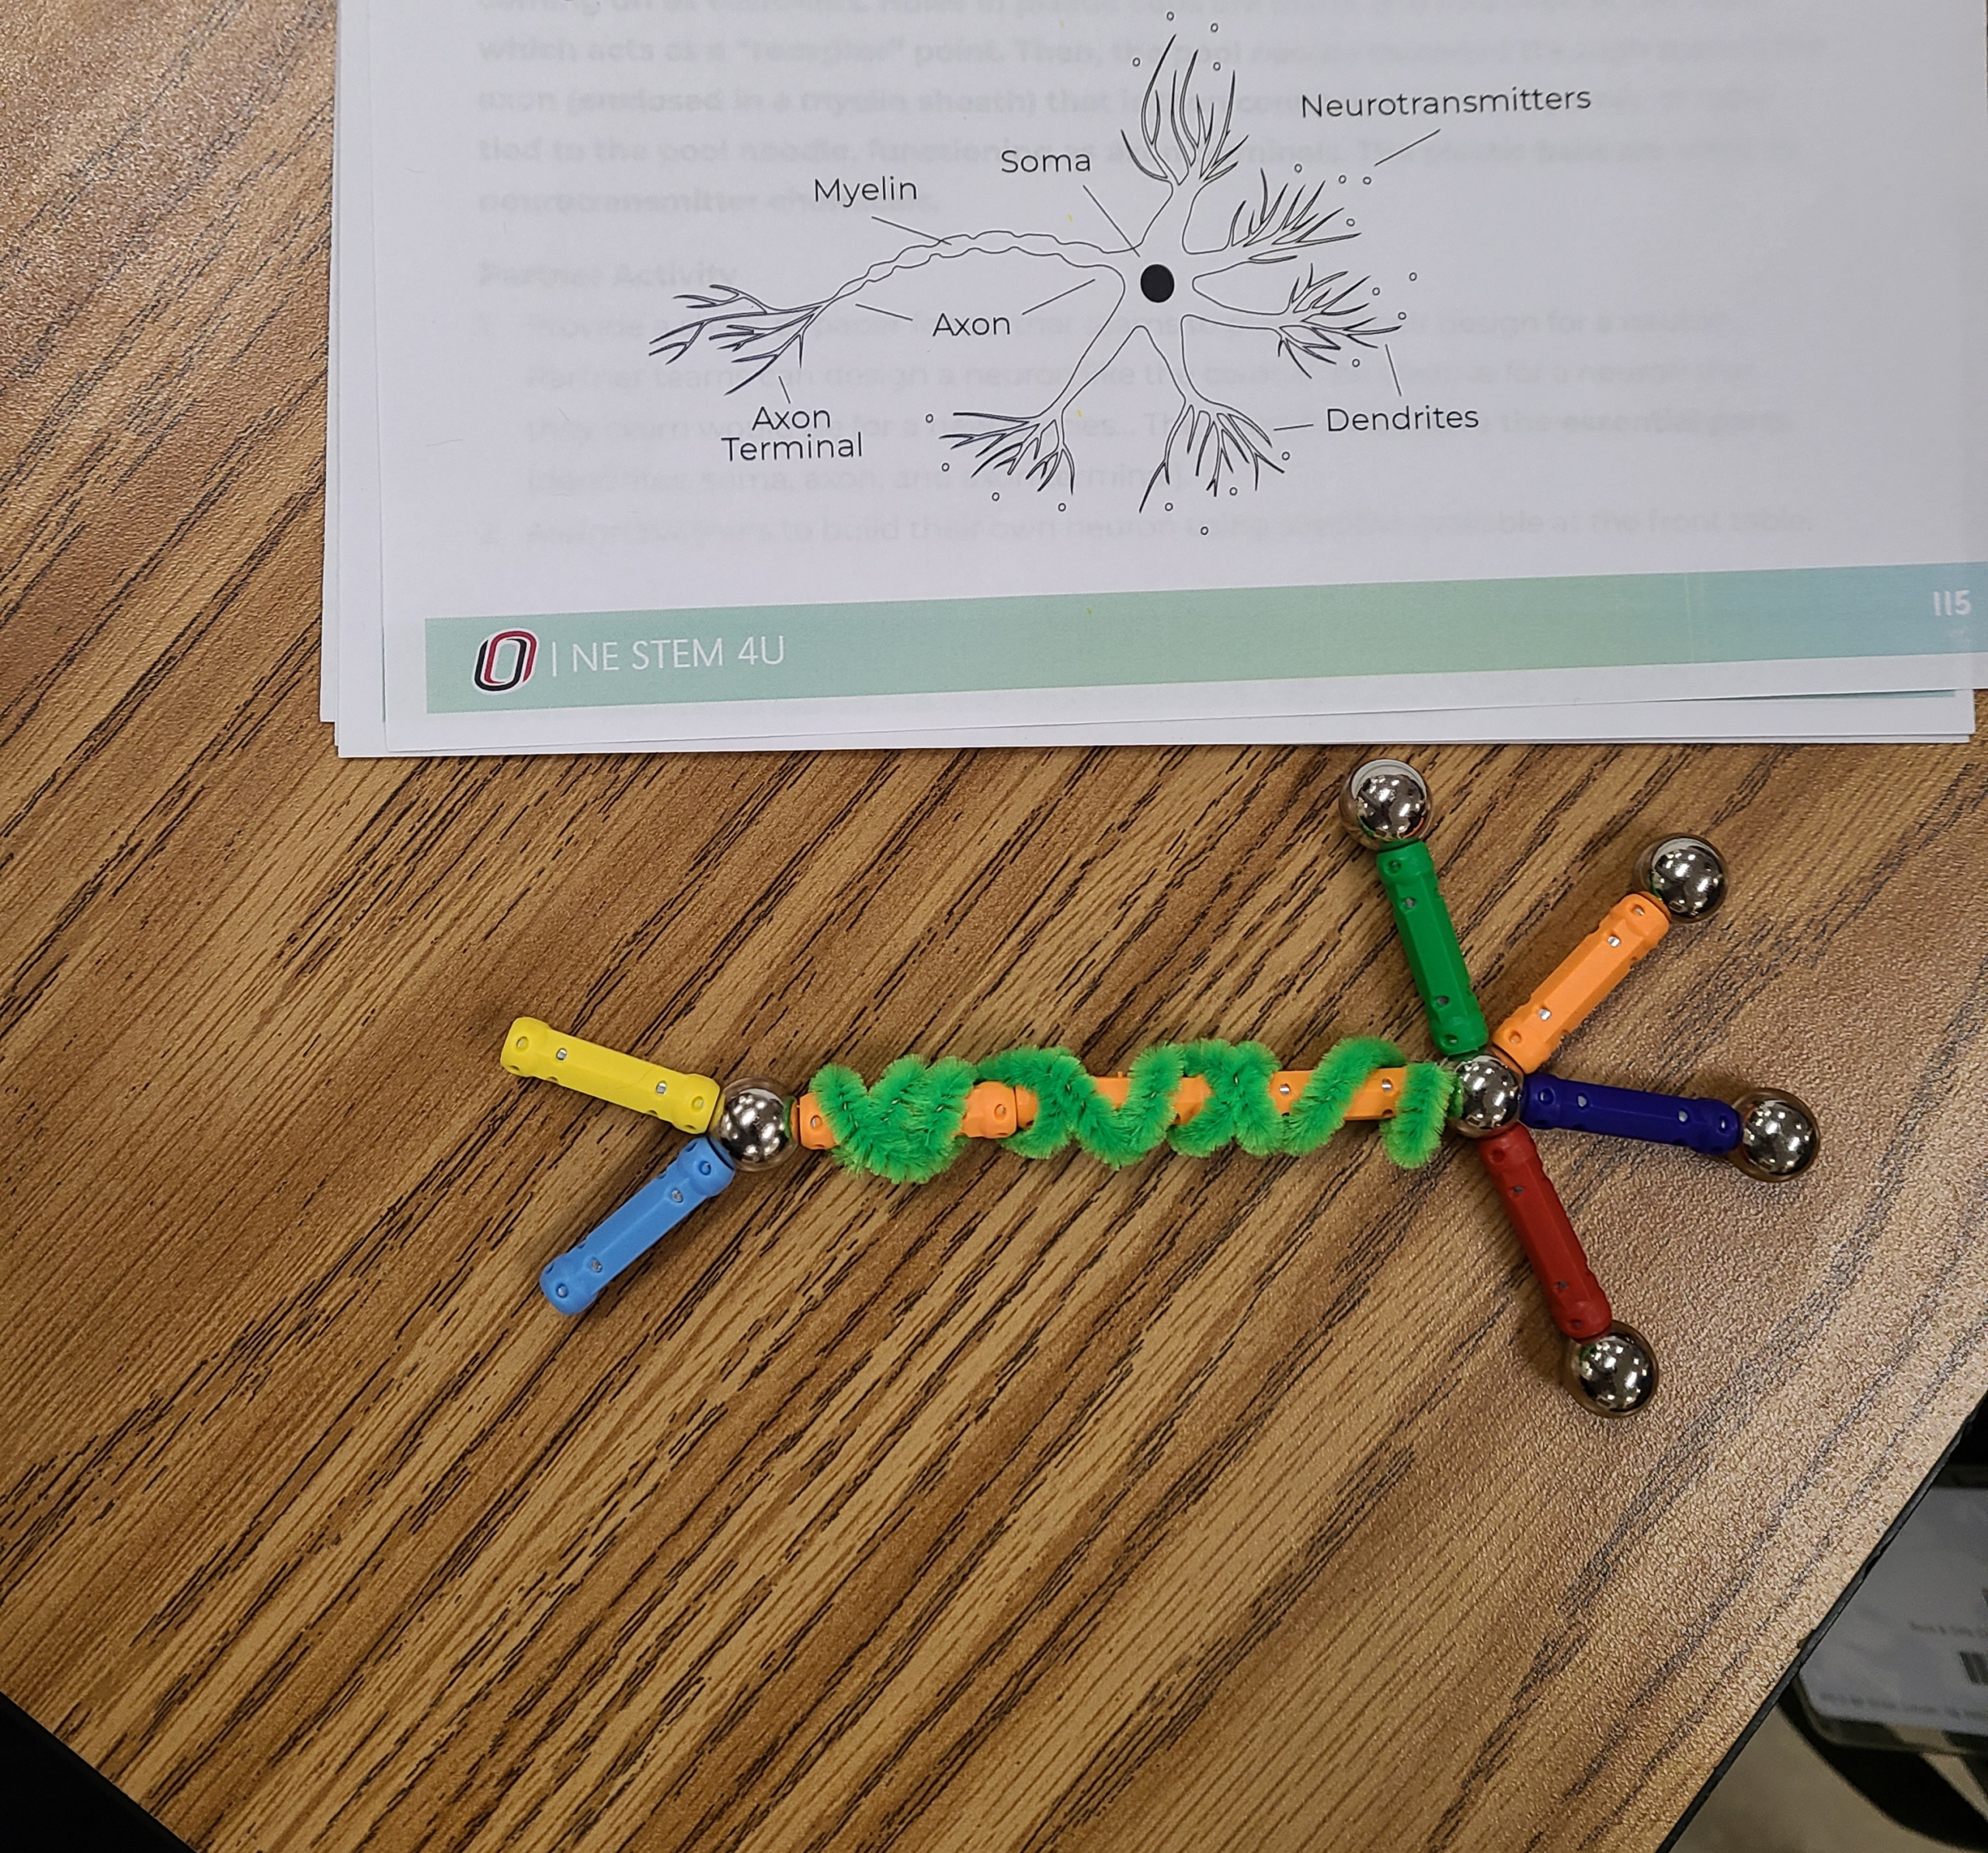 A human neuron modeled out of colorful magnetic sticks and spheres, with a coiled piece of green pipe cleaner representing the neuron's myelin sheath. A sheet of paper next to the model depicts a drawing of a neuron with labeled parts: myelin, soma, neurotransmitters, axon, axon terminal, and dendrites..